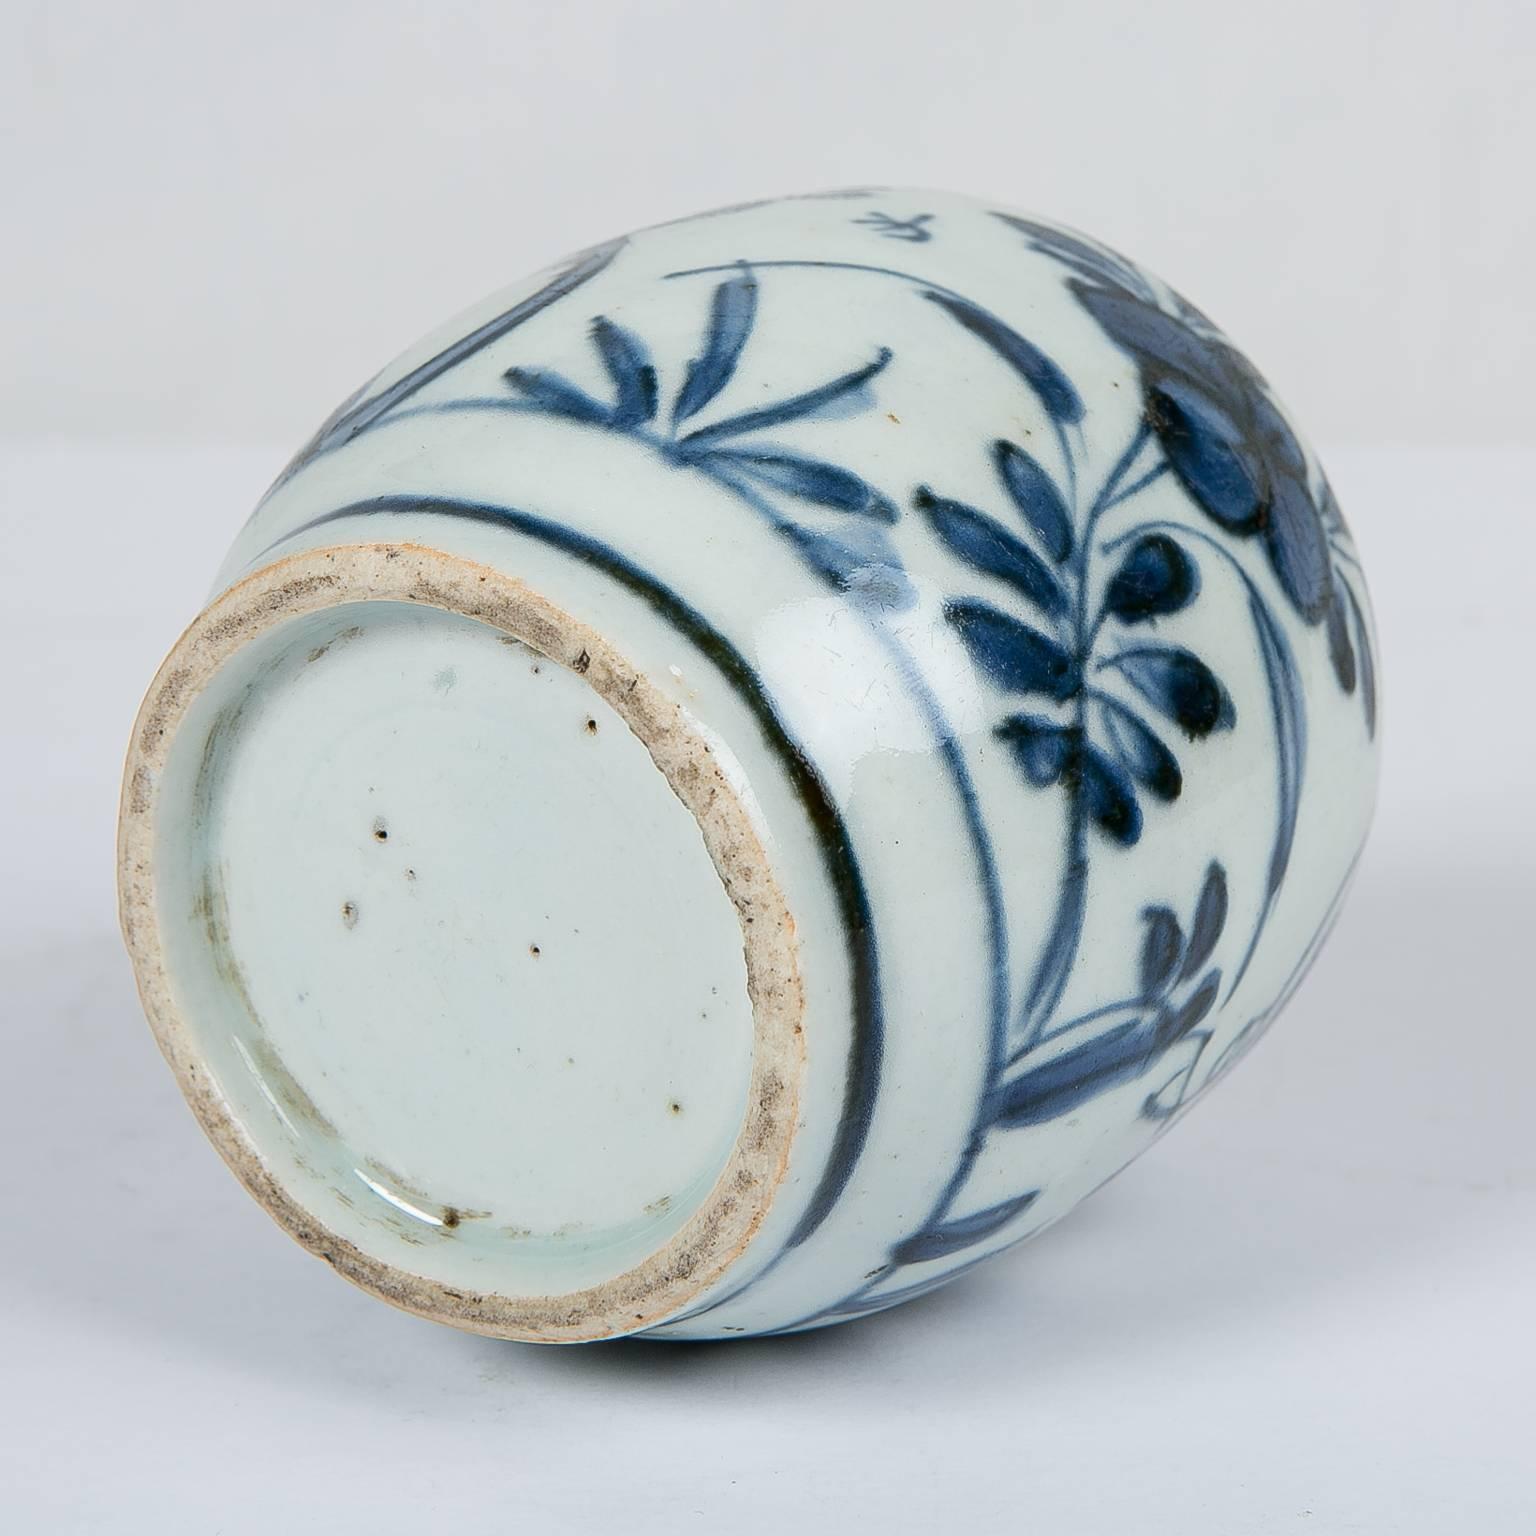 18th Century and Earlier Chinese Blue and White Small Zhangzhou Porcelain Vase Made circa 1590